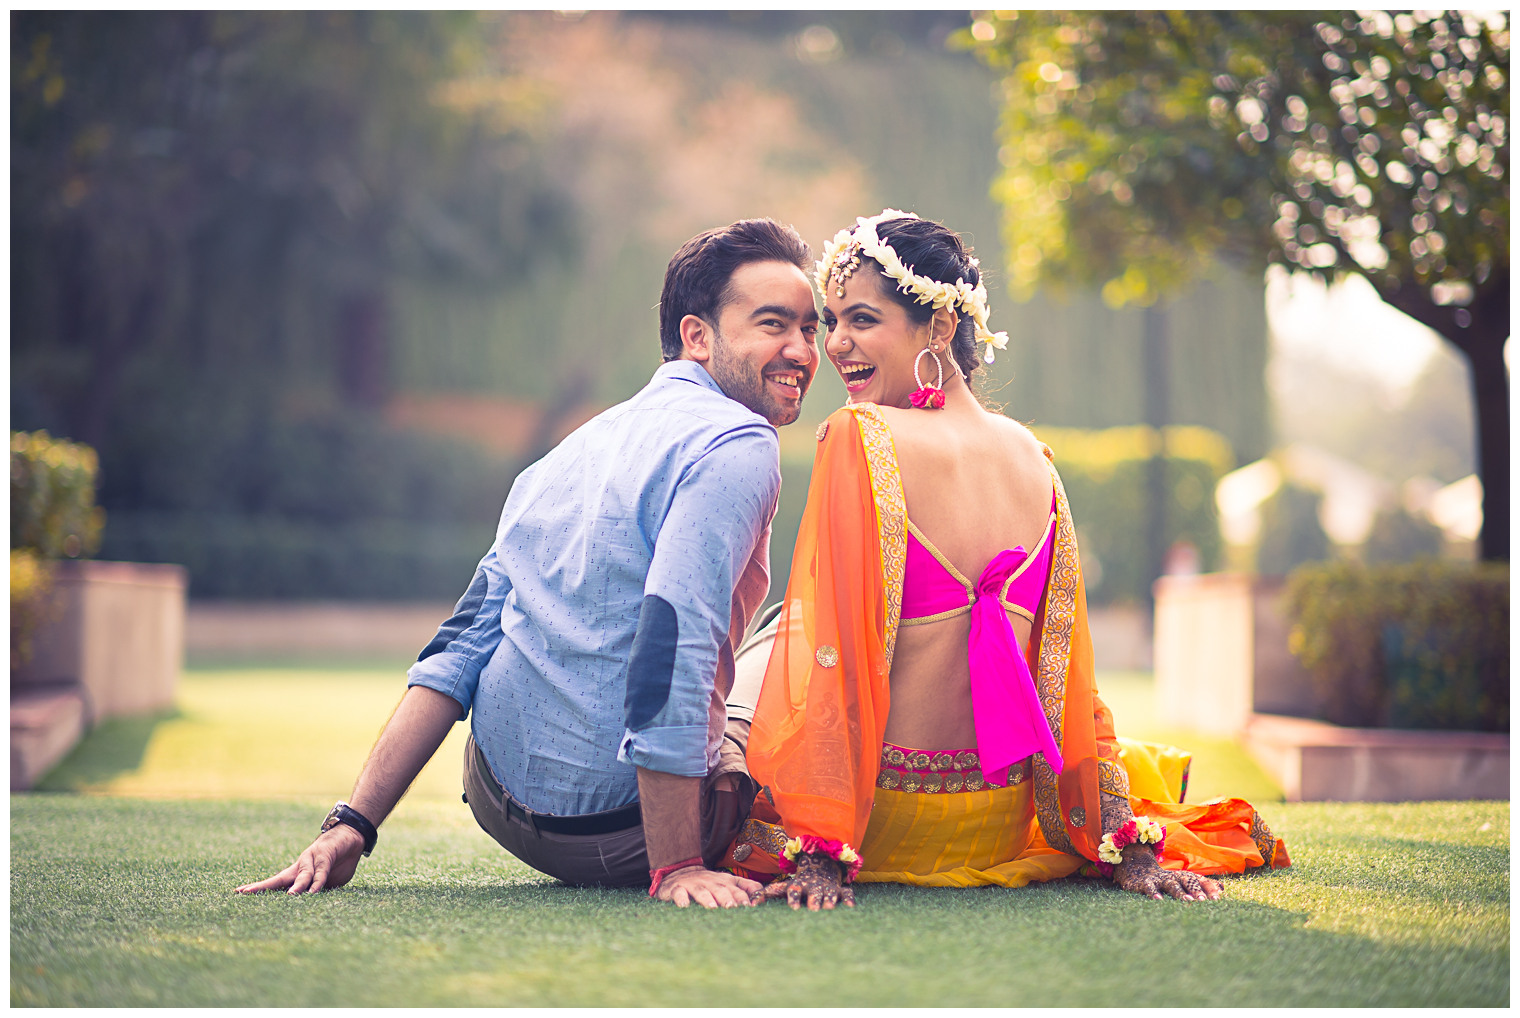 10 Best Couple Poses  Ultimate Guide for Best Couple Photos